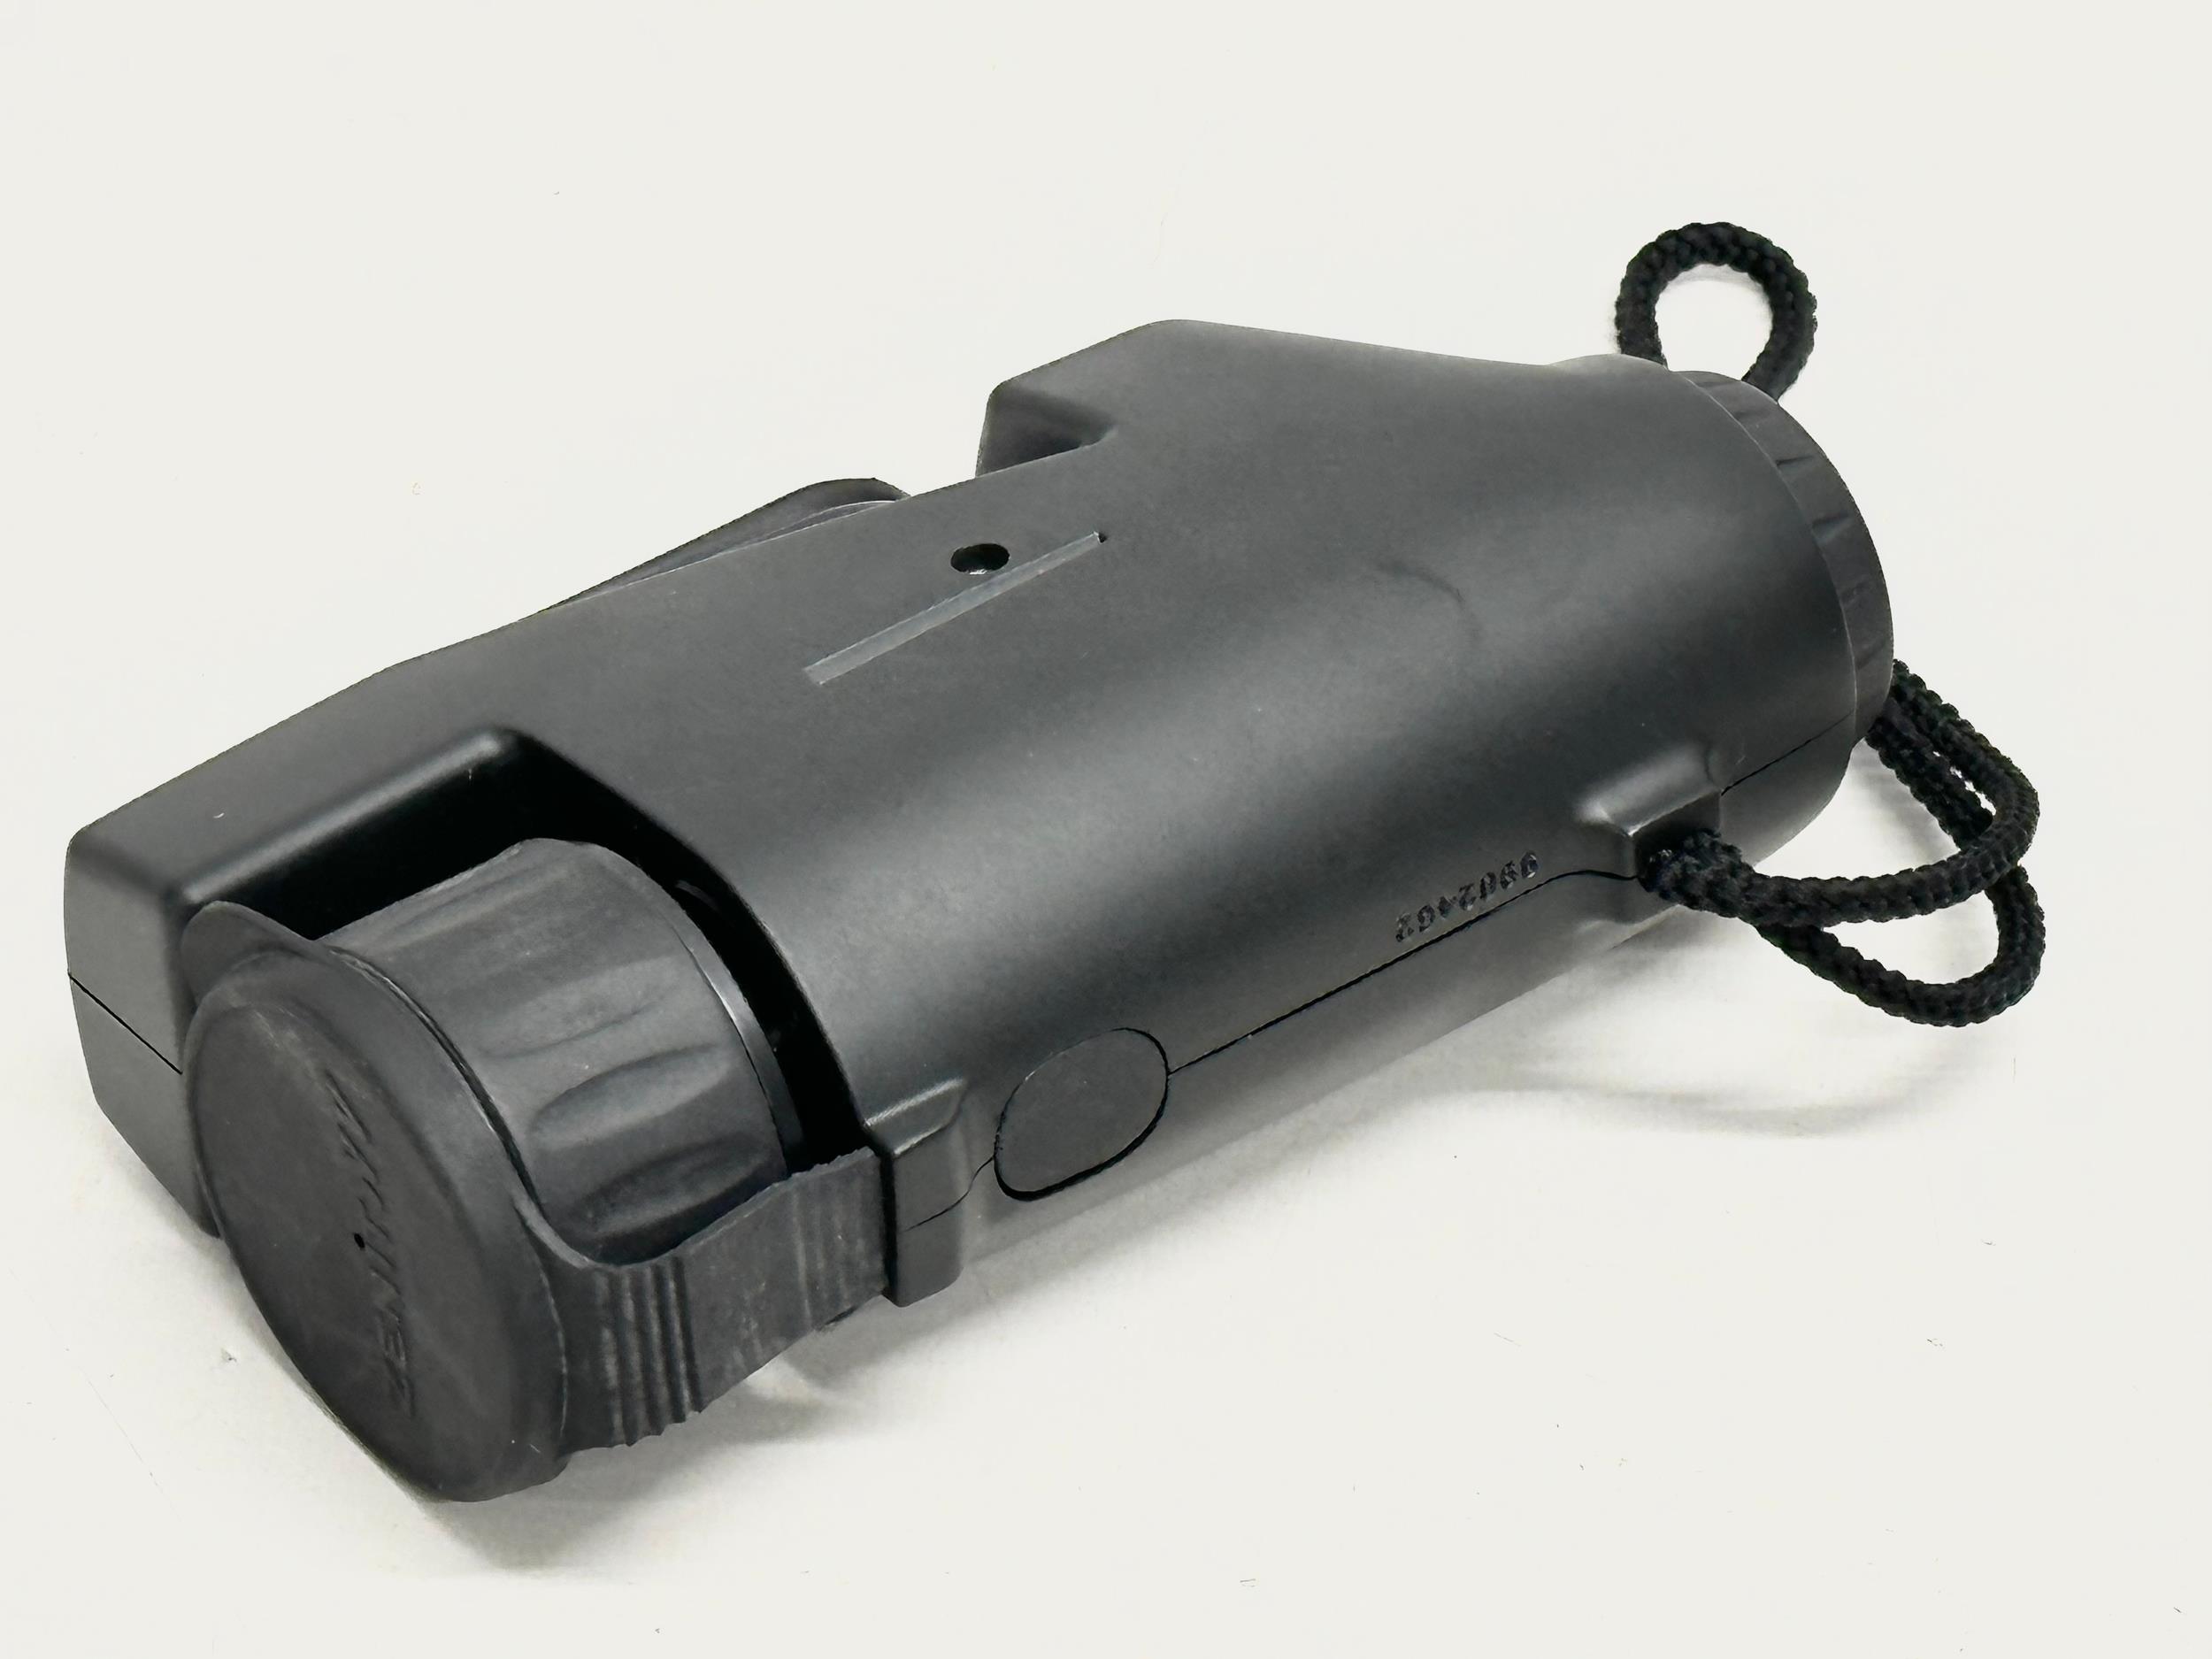 A Zenit NV Moonlight Night Vision scope with case - Image 3 of 6